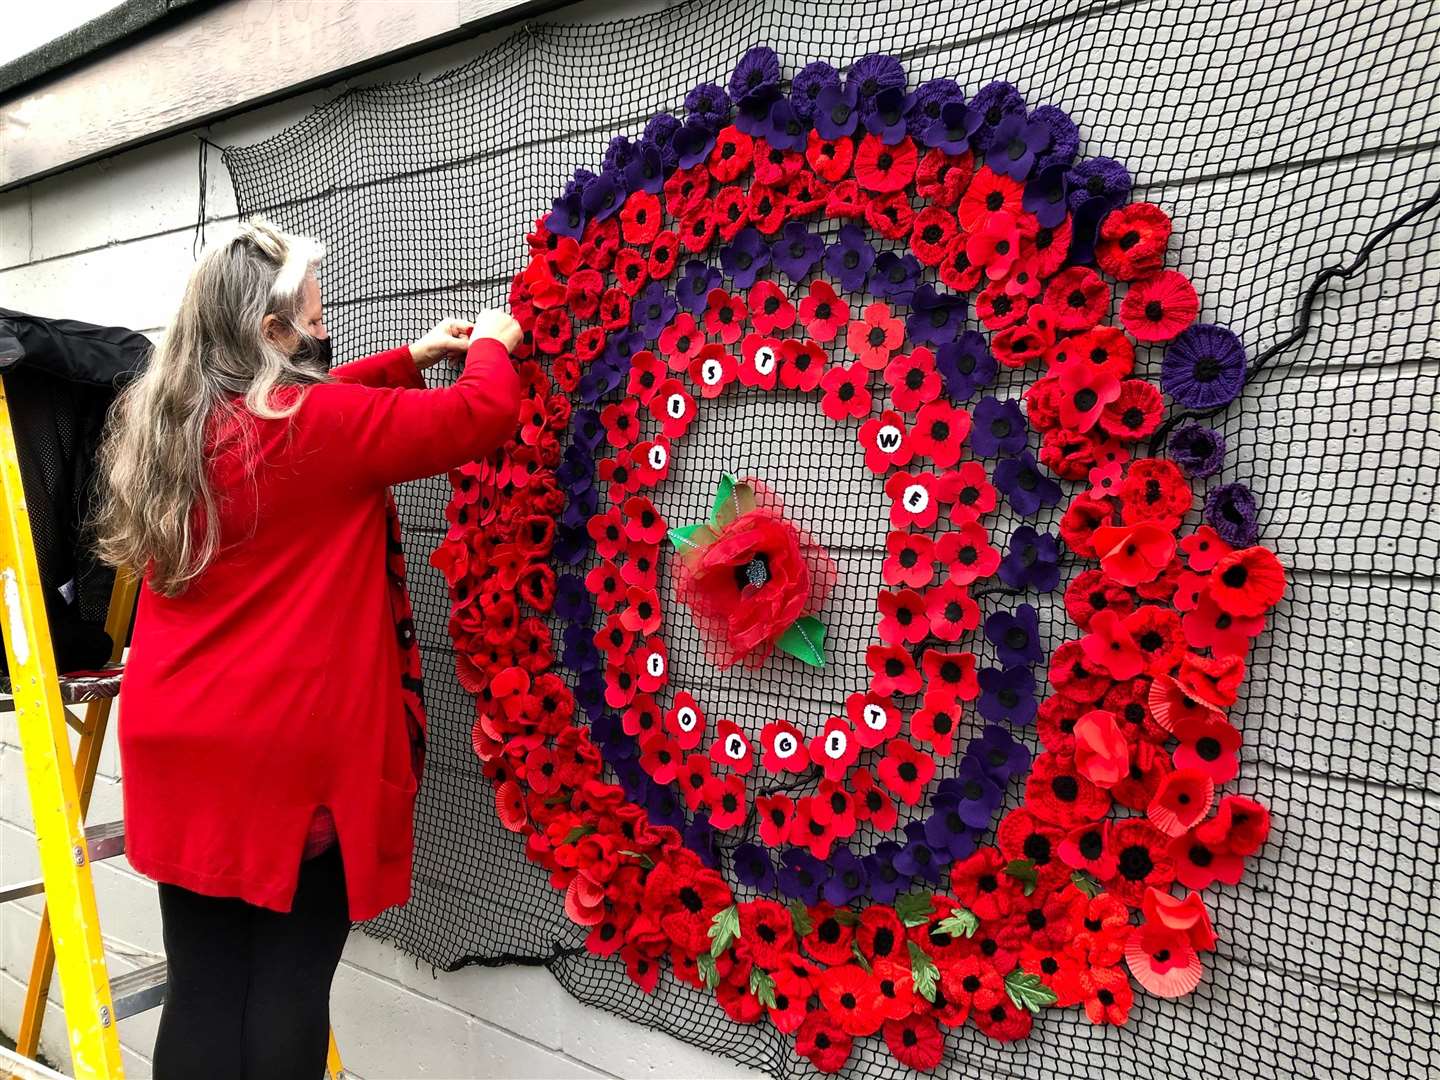 This year there was a large poppy display as part of the ceremony featuring over 400 felt, crochet, knitted and knotted poppies.